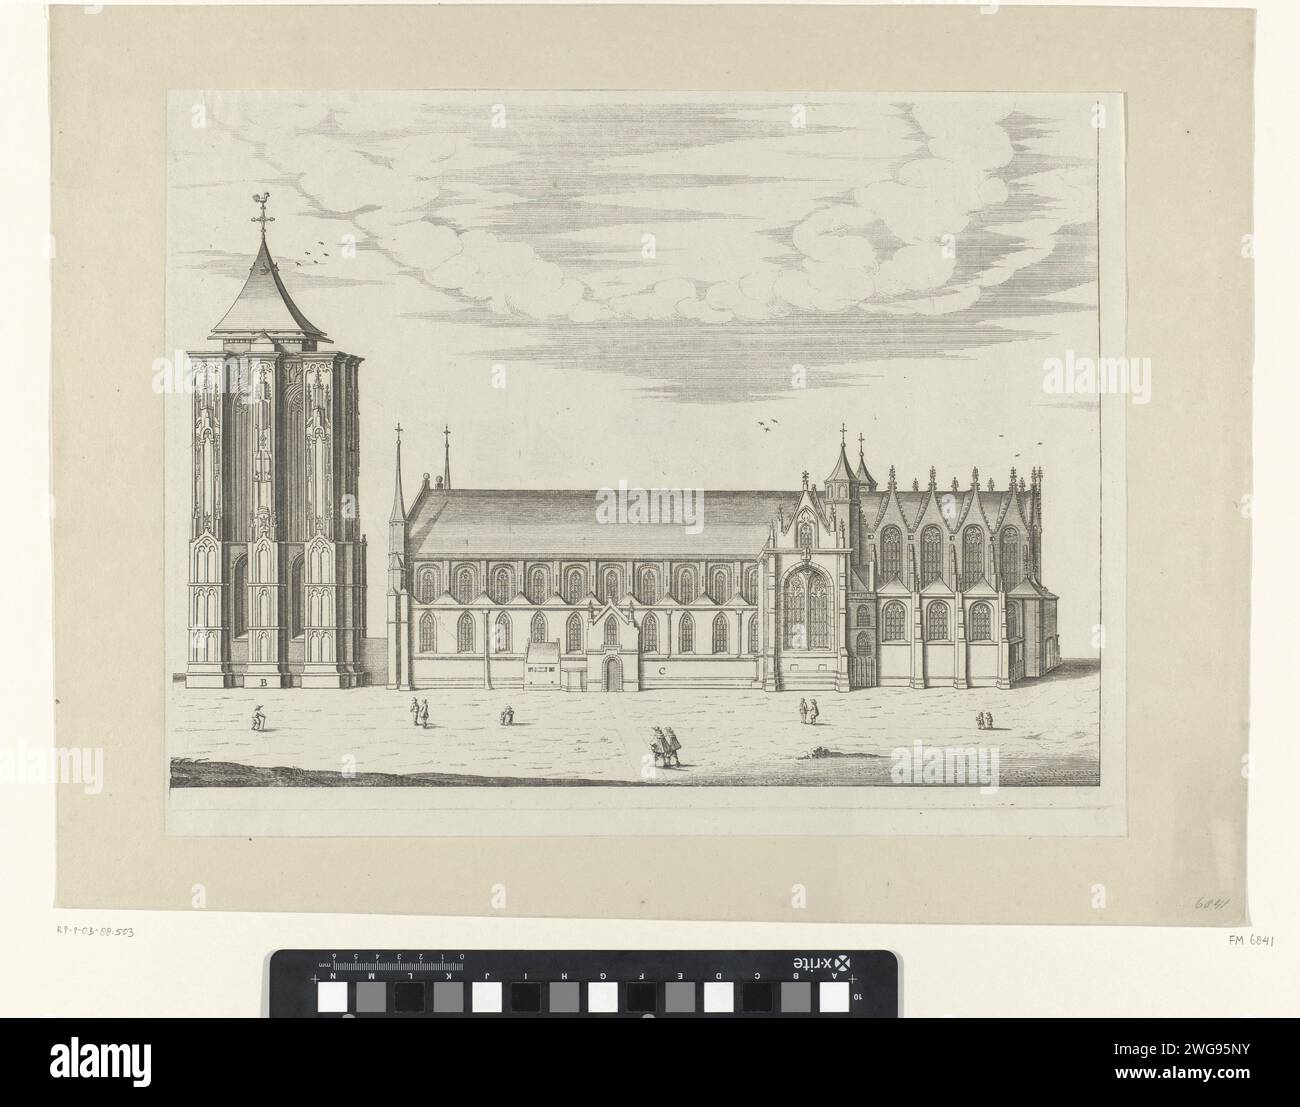 Sint -Lievensmonsterkerk and Toren in Zierikzee, in Welstand, before the fire of 1832, 1600 - 1699 print Sint -Lievensmonsterkerk and tower or Grote Kerk in Zierikzee, in Welstand, before the fire of October 6, 1832. With a few figures on the road, the tower and the church indicated by the letters B and C. Northern Netherlands paper engraving church (exterior) Sint-Lievens monster tower. Sint-Lievensmonsterkerk Stock Photo